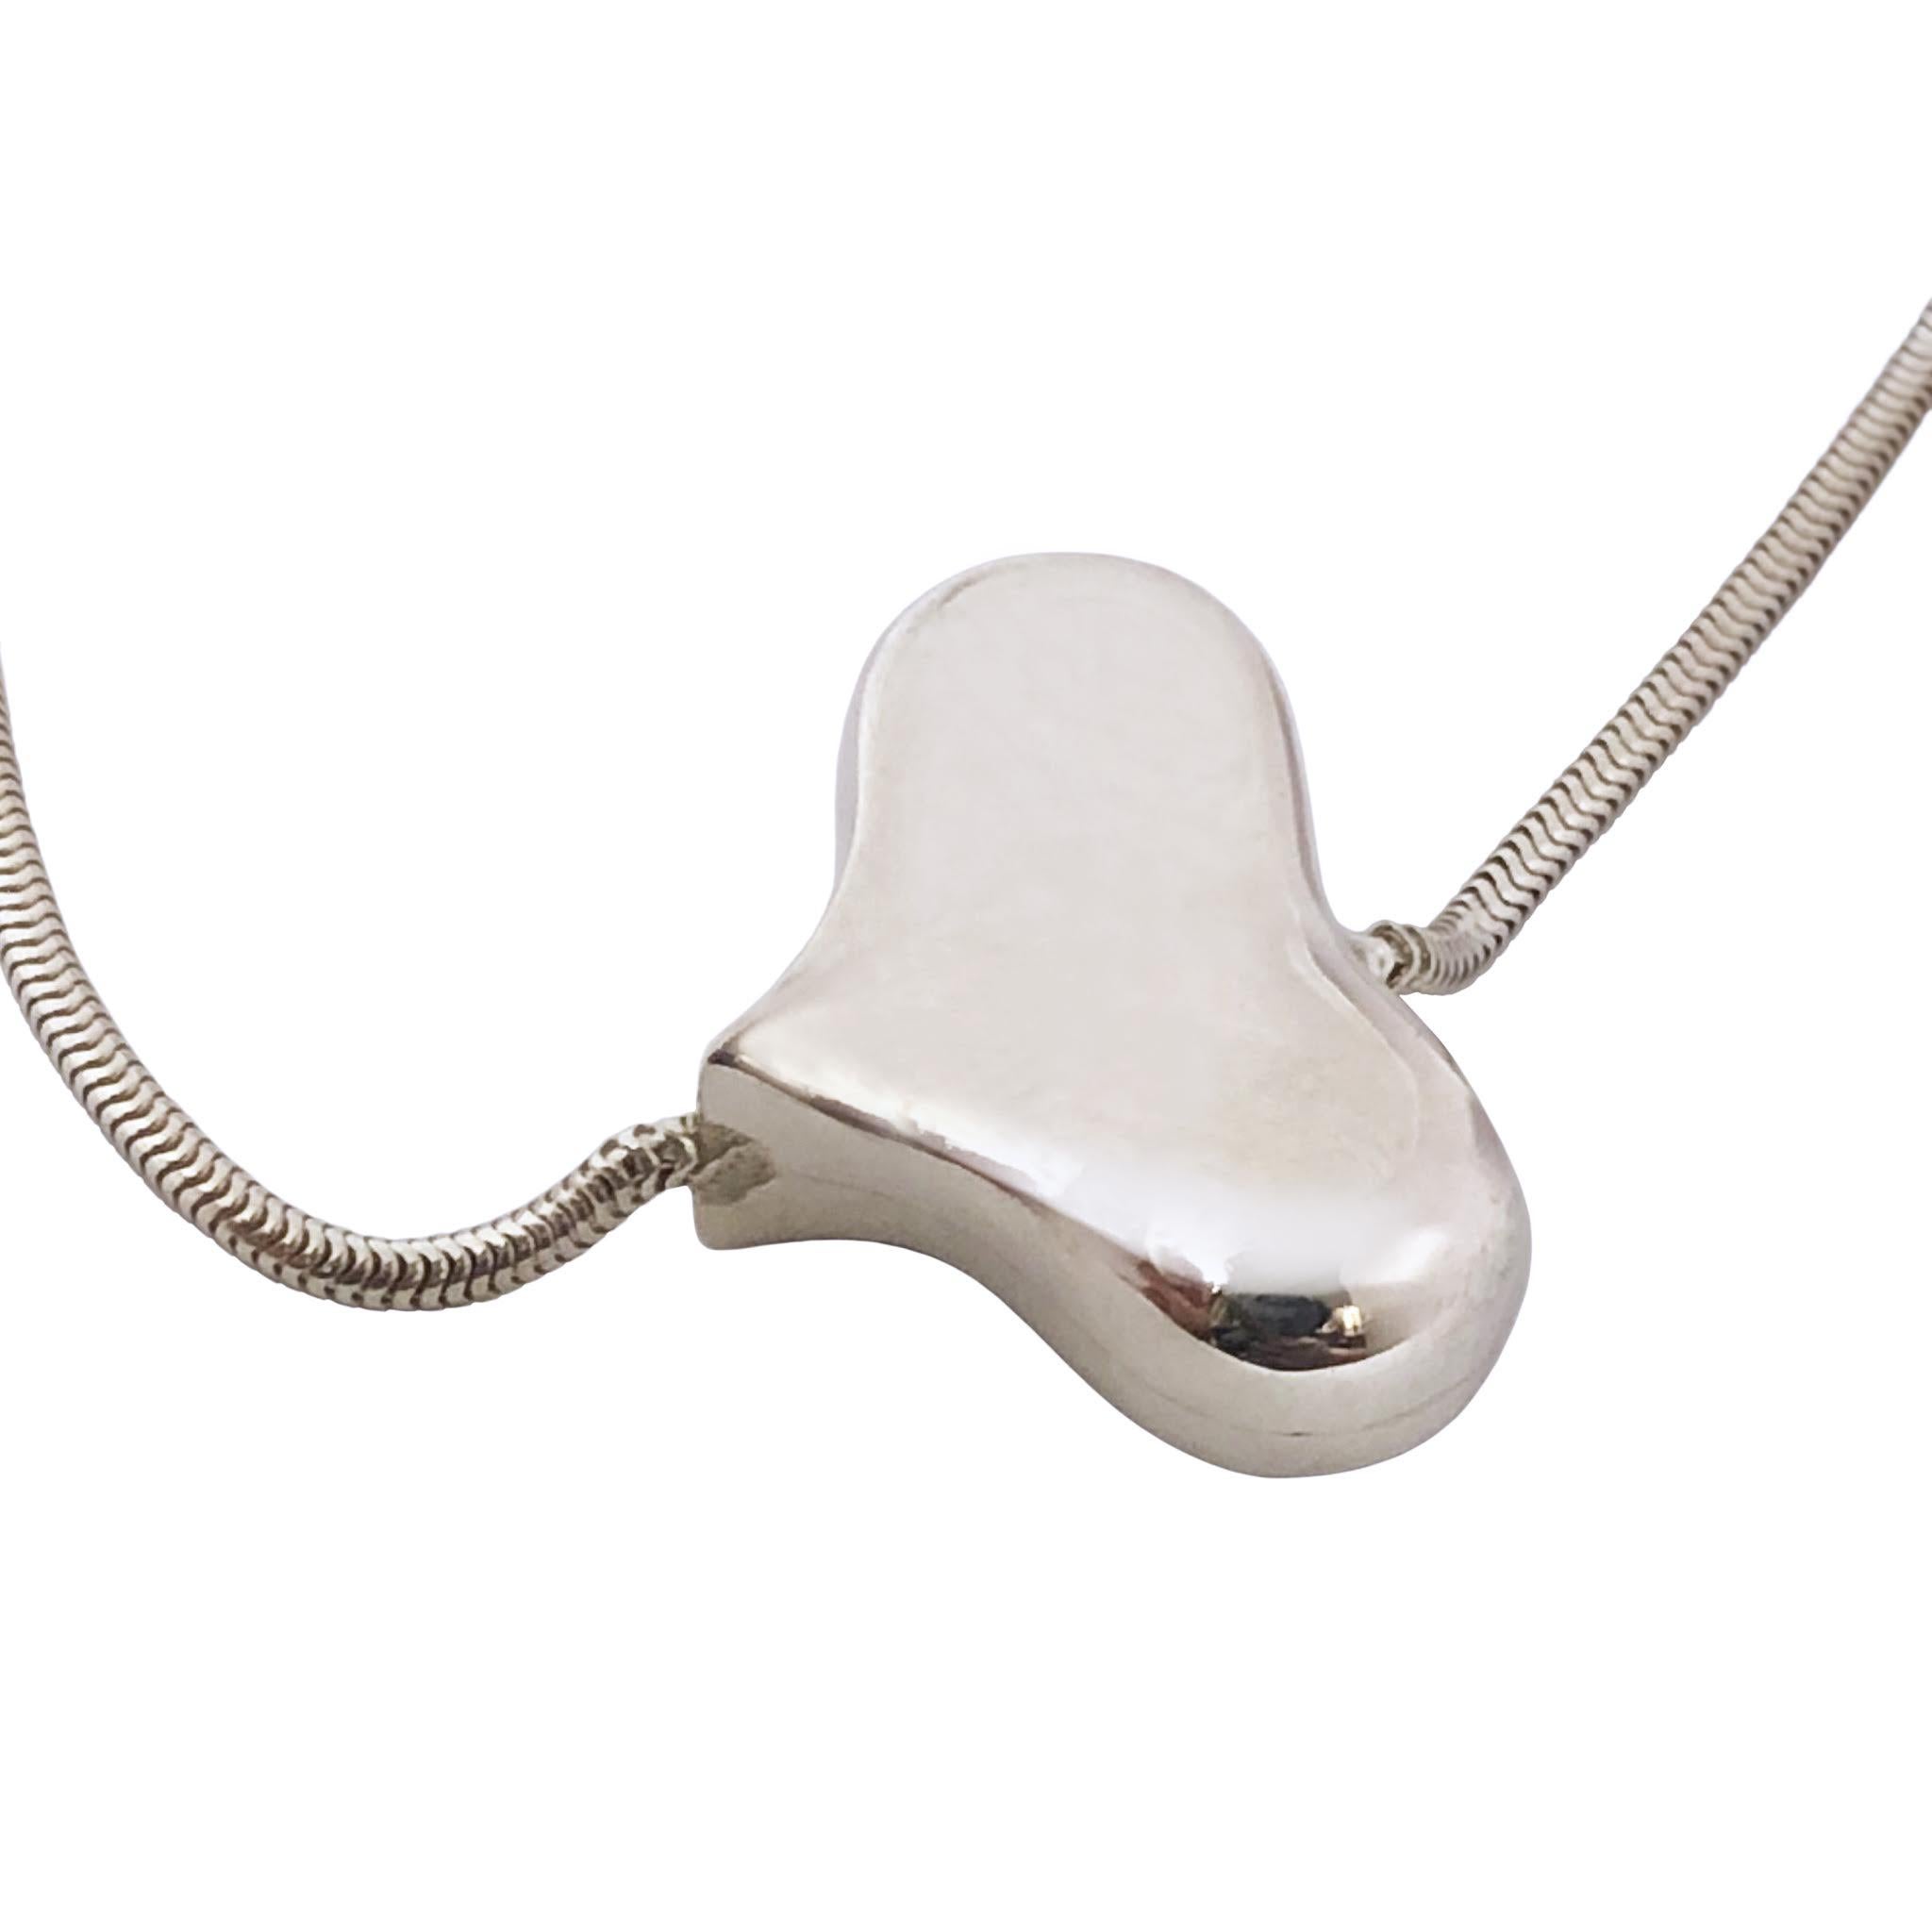 Circa 1980s Angela Cummings Sterling Silver Puffed Heart Necklace, a stylized Heart that is stationary and measuring 1 X 5/8 inch and 1/4 inch thick. Suspended from a 2 M.M. Snake chain, 30 inches in length.